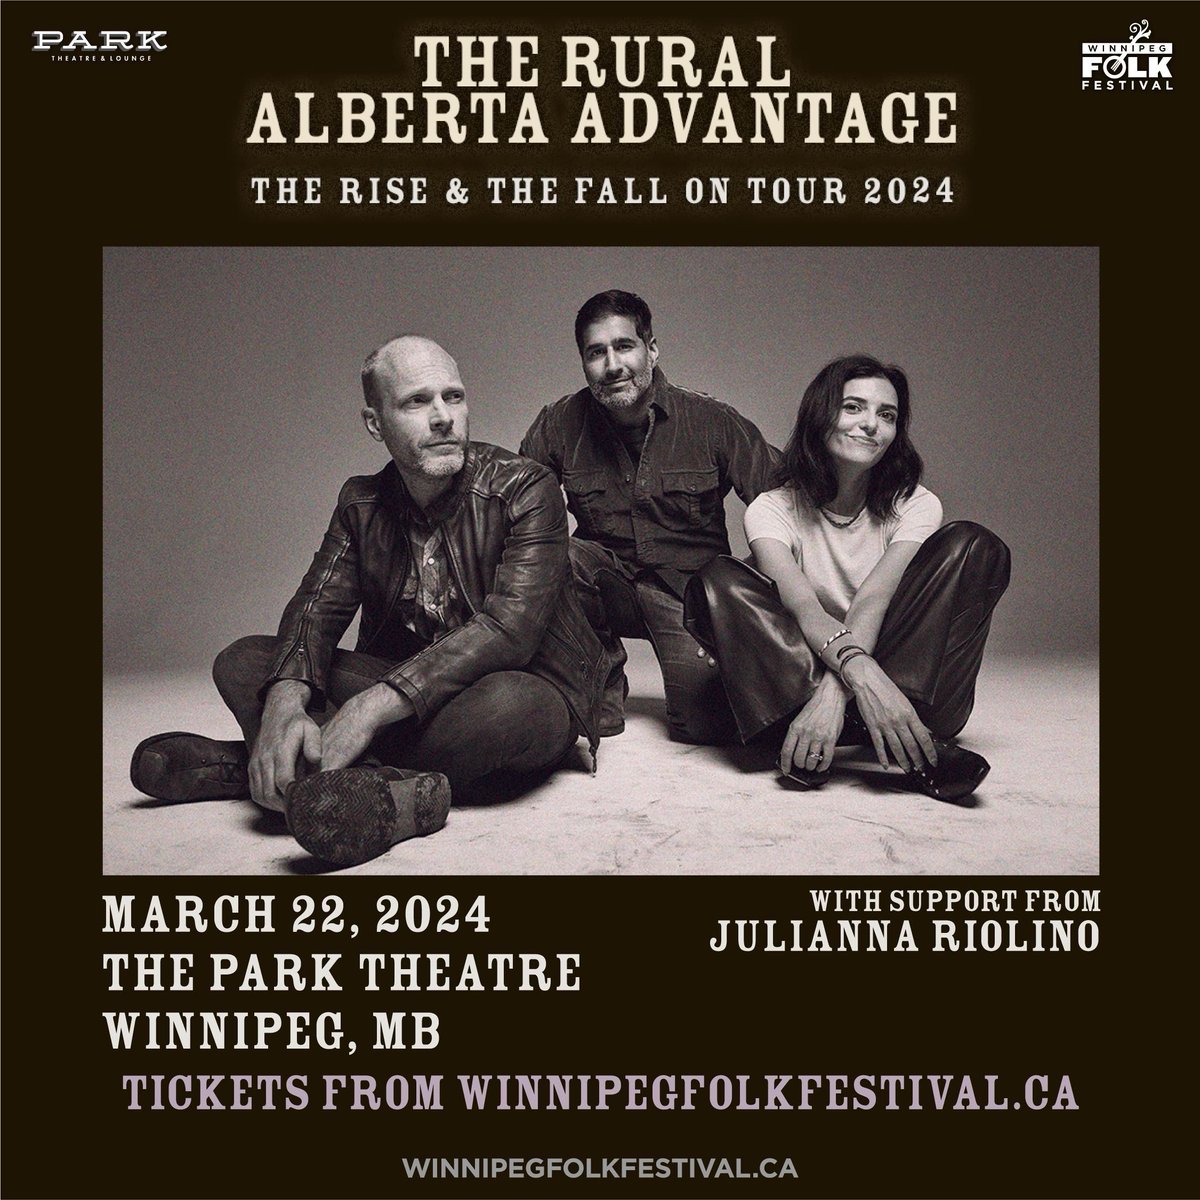 We are VERY excited to welcome back @ruralalberta to @myparktheatre on March 22, 2024 with @jrjuliannasings. They will be touring their fifth studio album 'The Rise & The Fall'. Tickets on sale NOW! bit.ly/460ZXsG